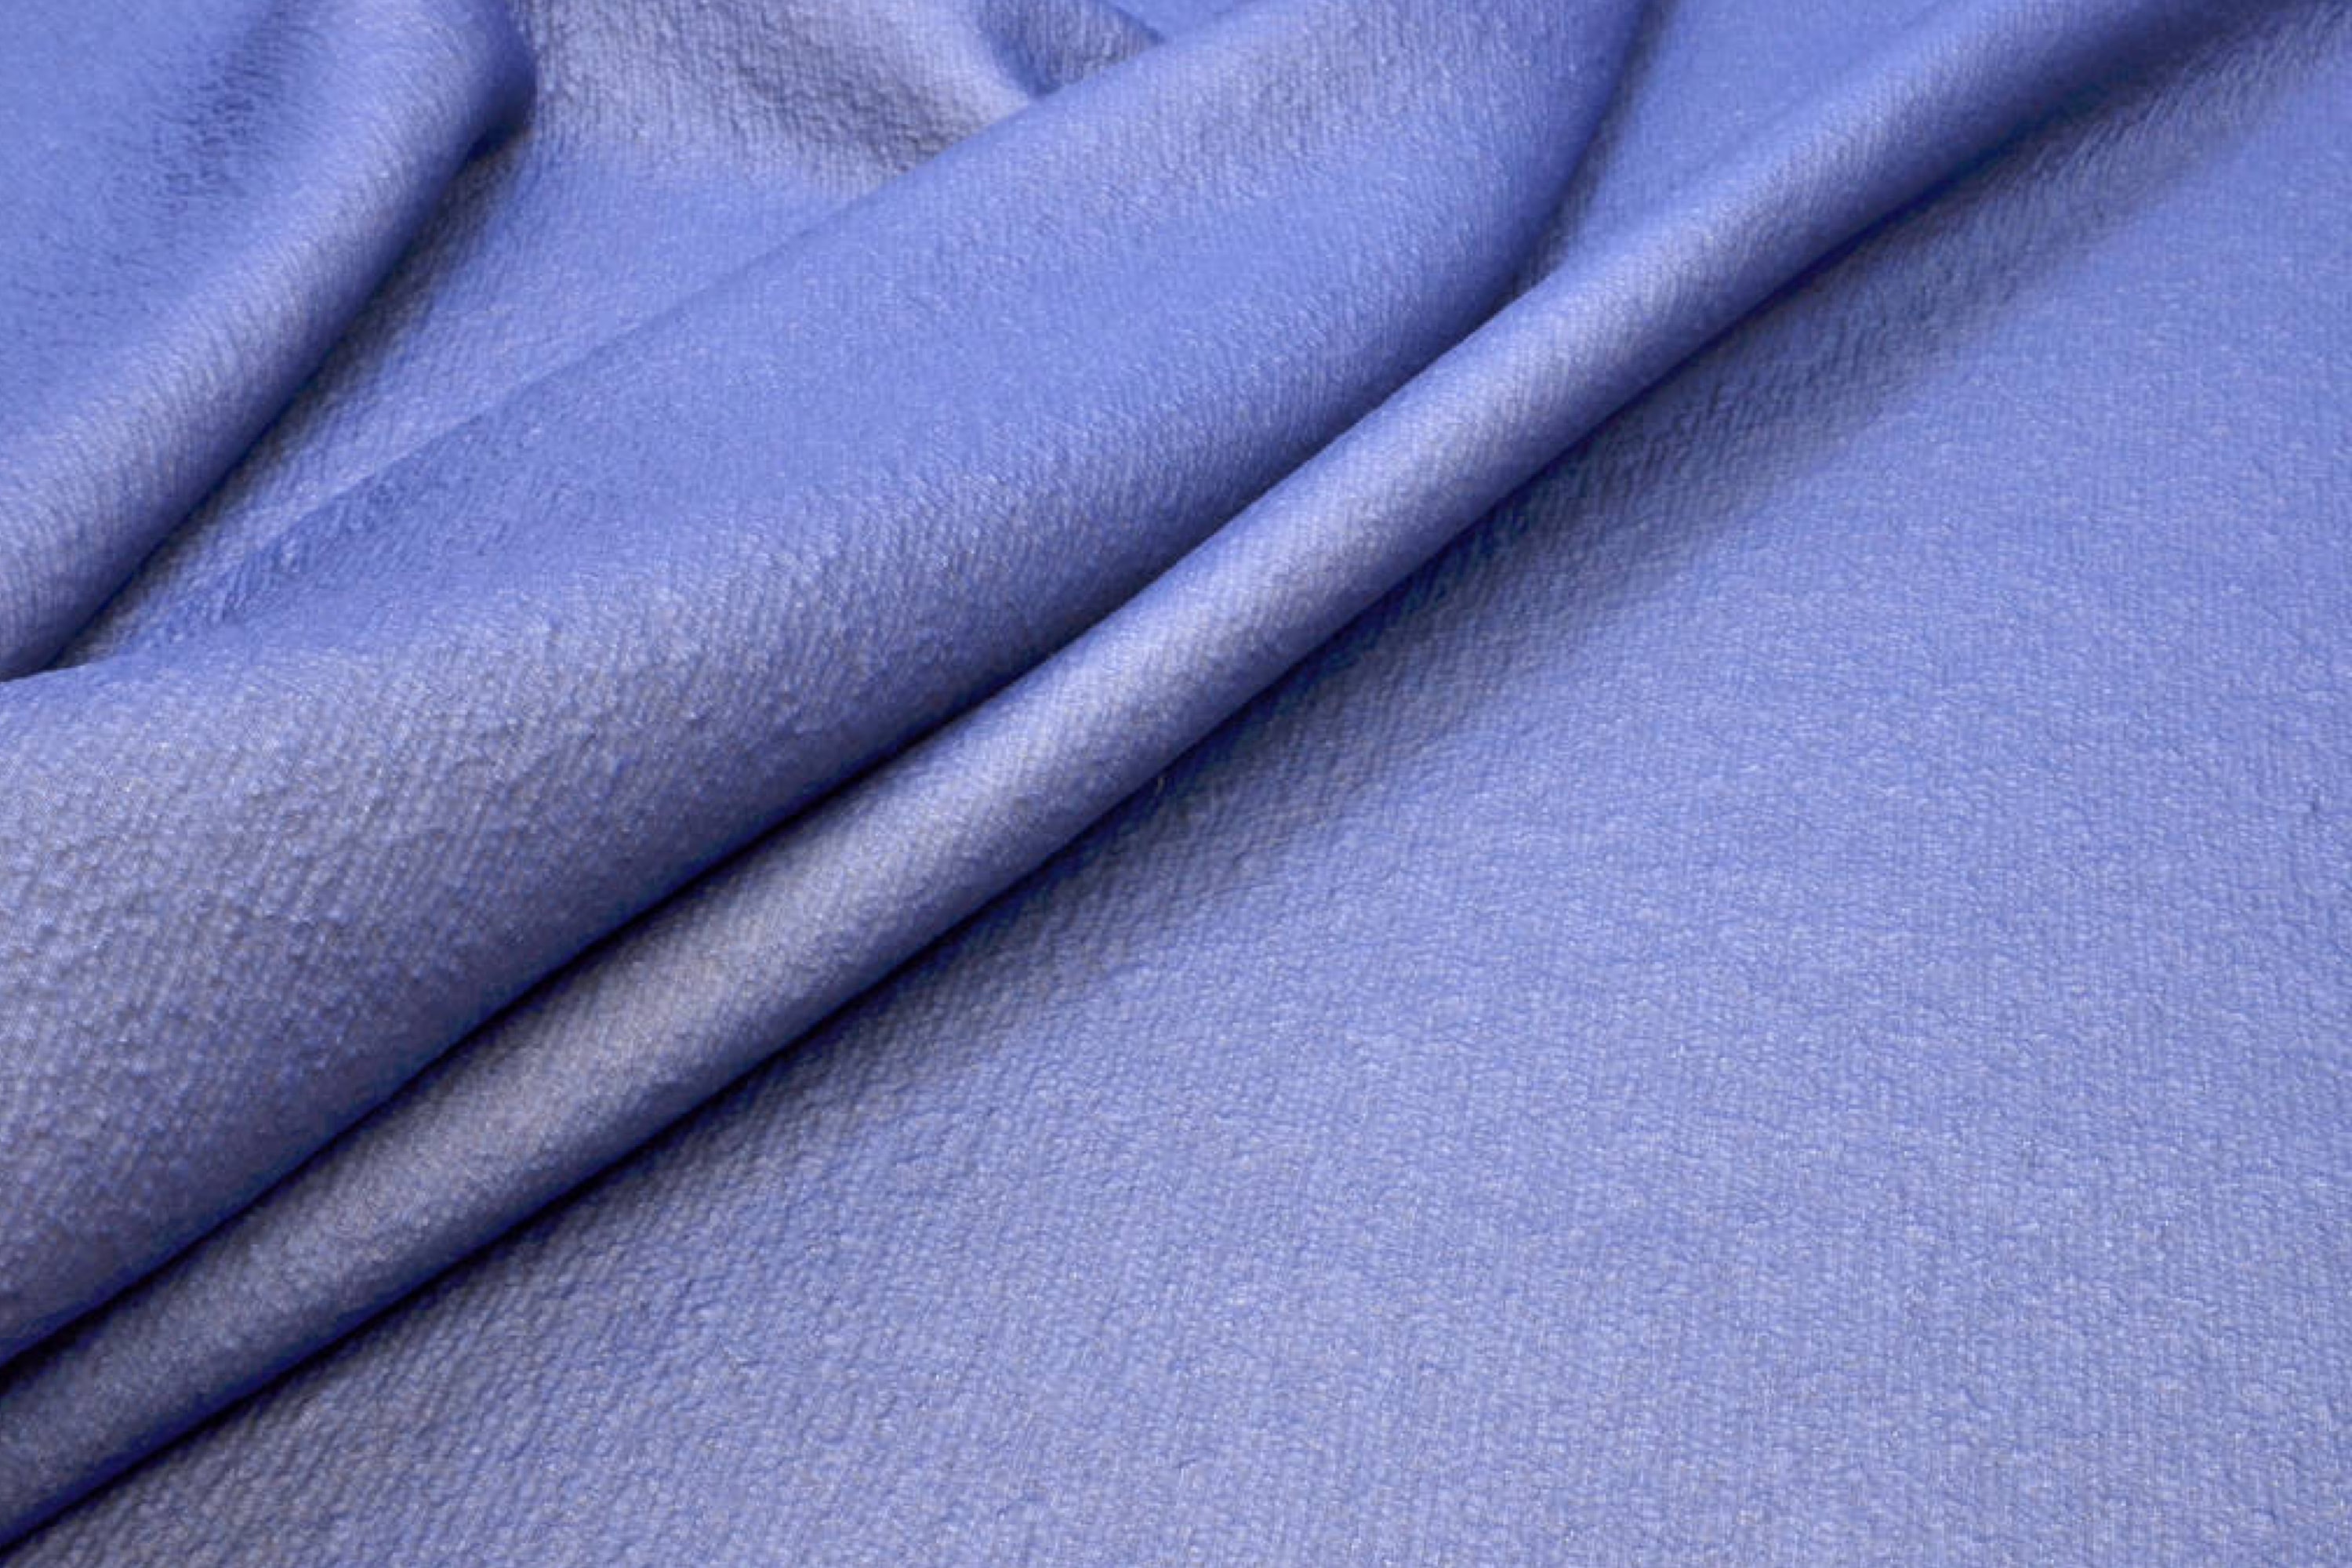 How to Care For Viscose Fabric